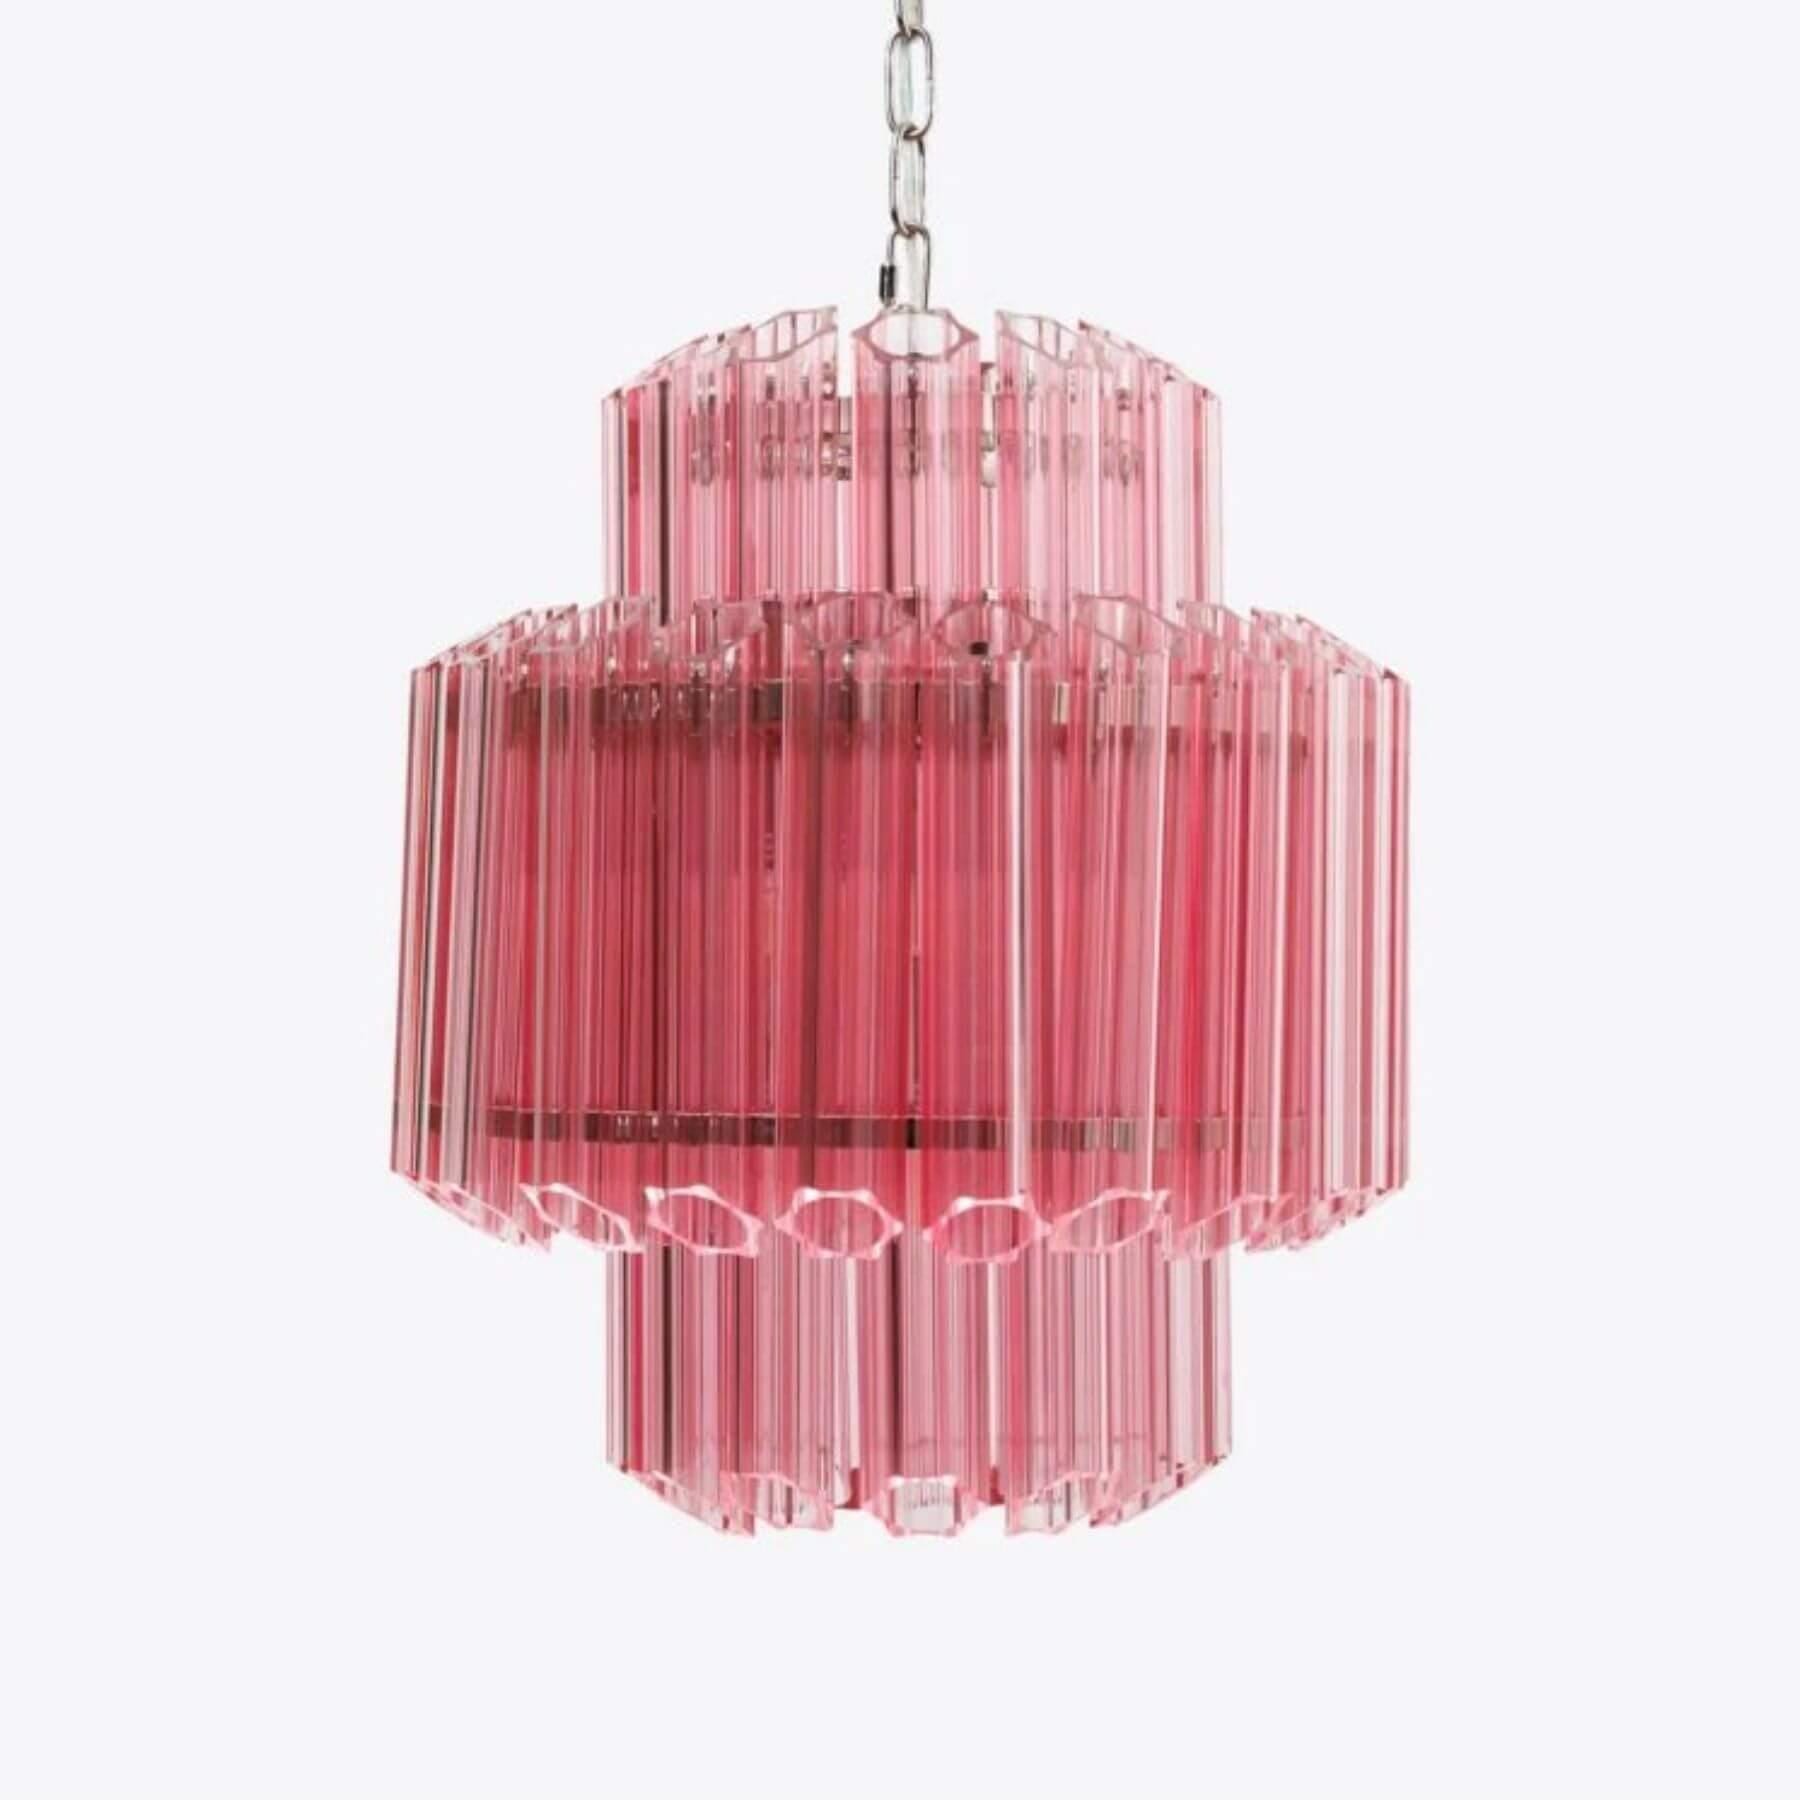 Pure White Lines Piccolo Palermo Chandelier Polished Nickel Pink